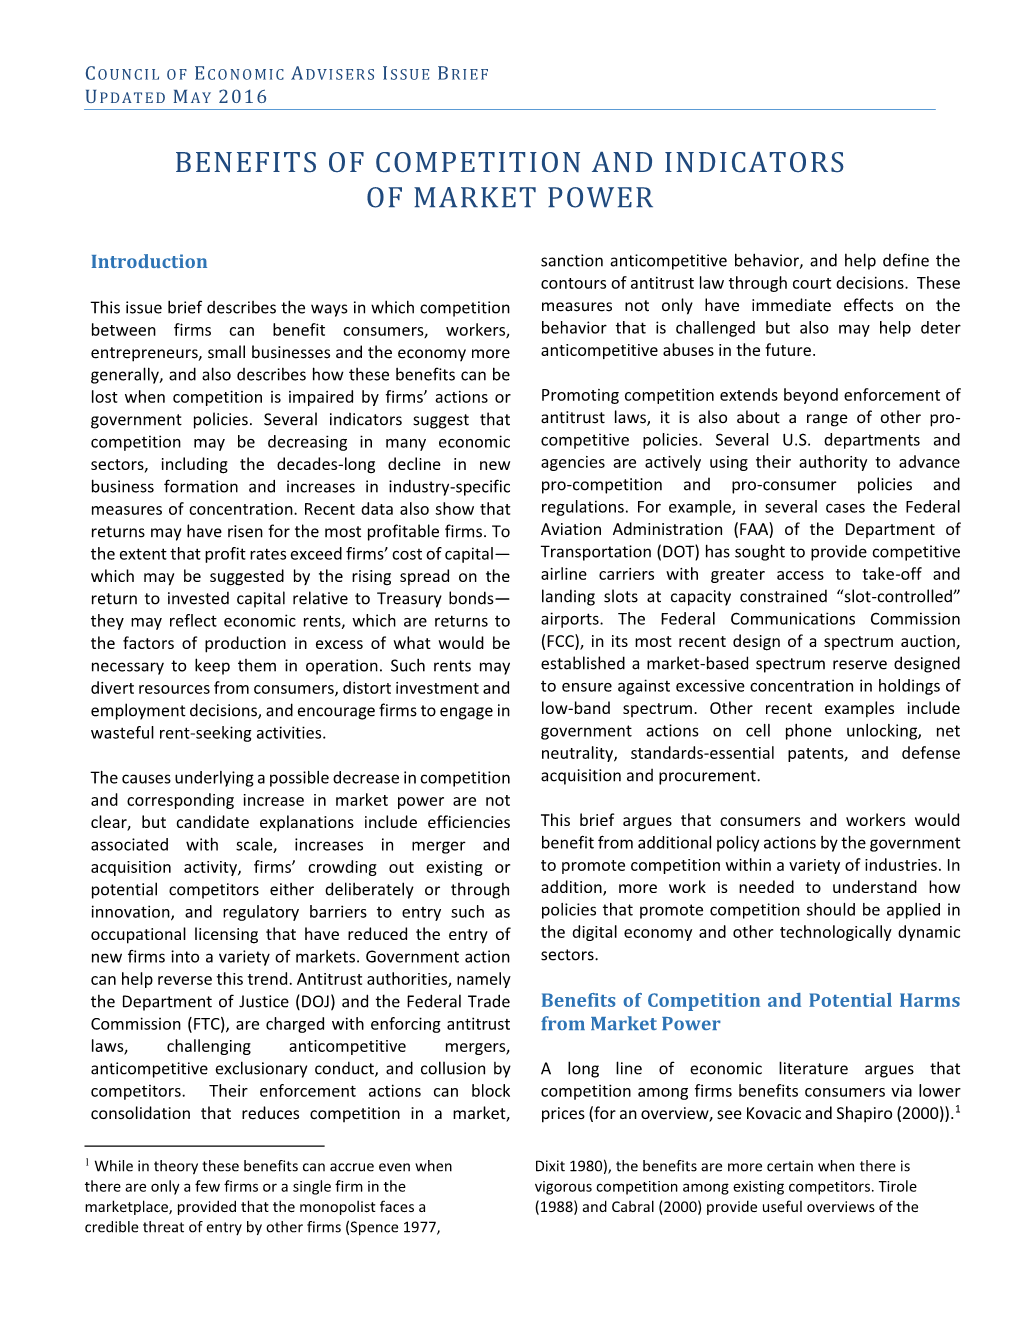 Benefits of Competition and Indicators of Market Power